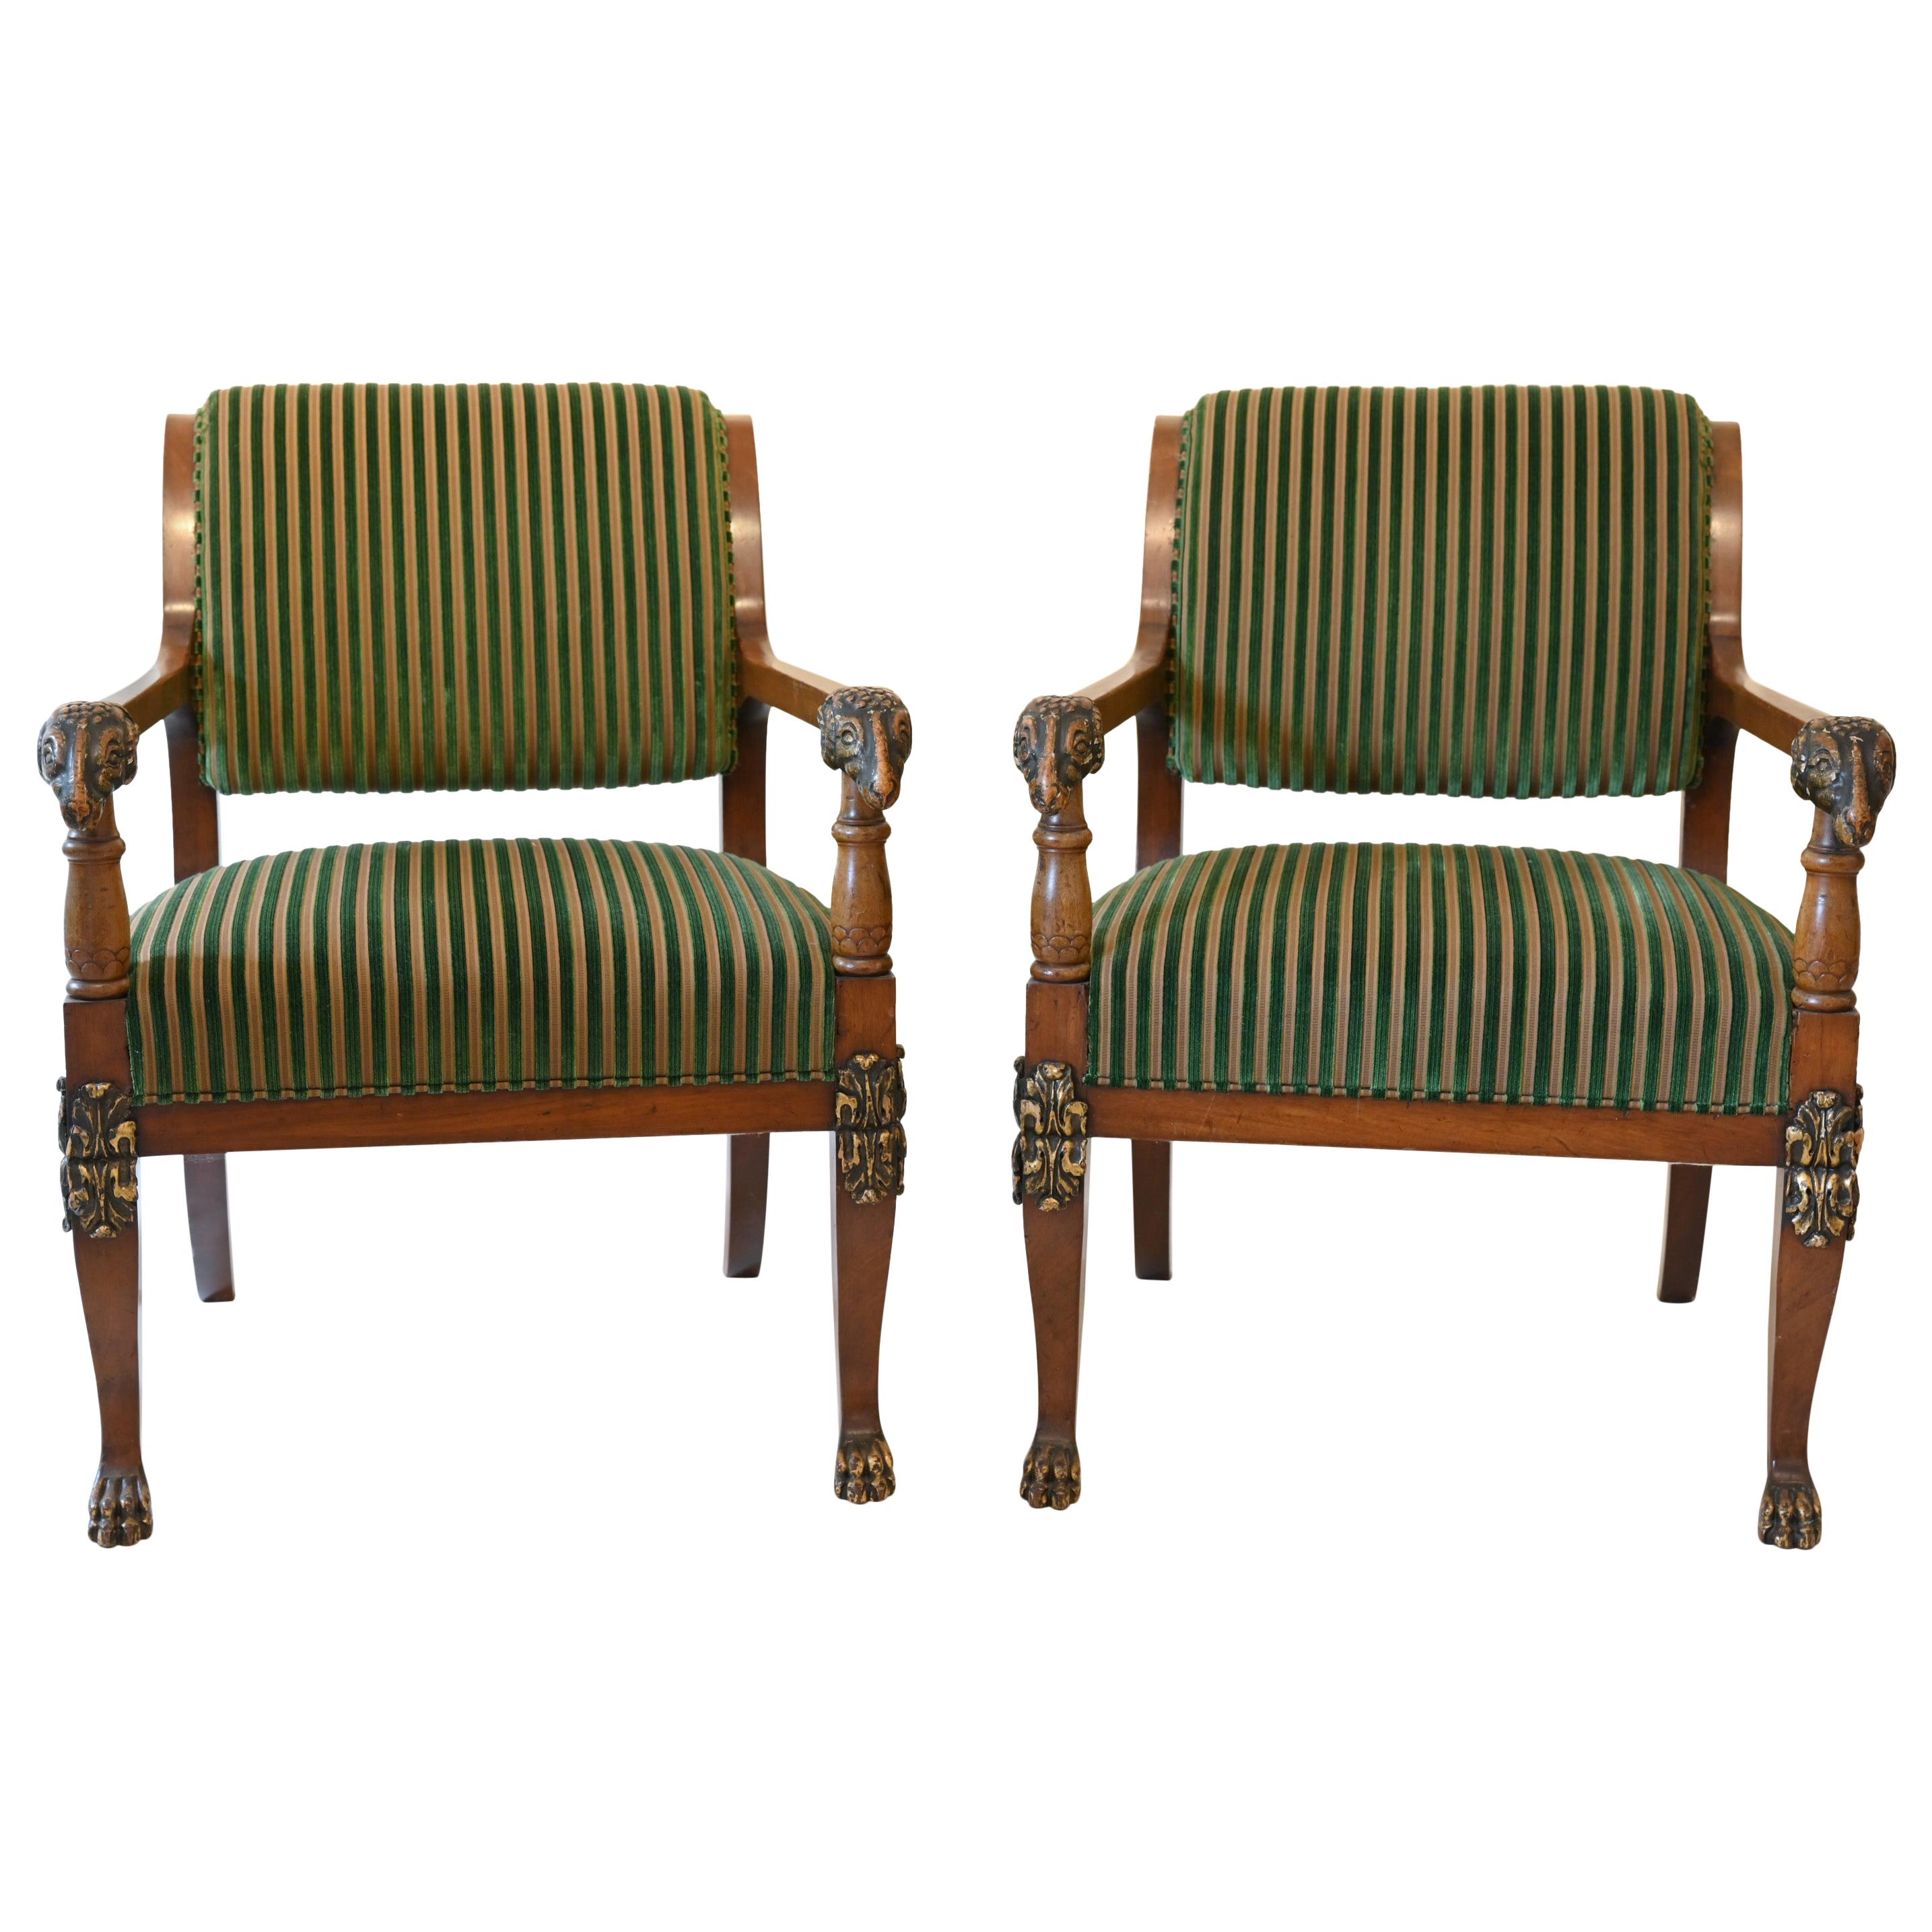 Pair of Mahogany Armchairs with Ram Heads, End of the 18th Century, Baltic